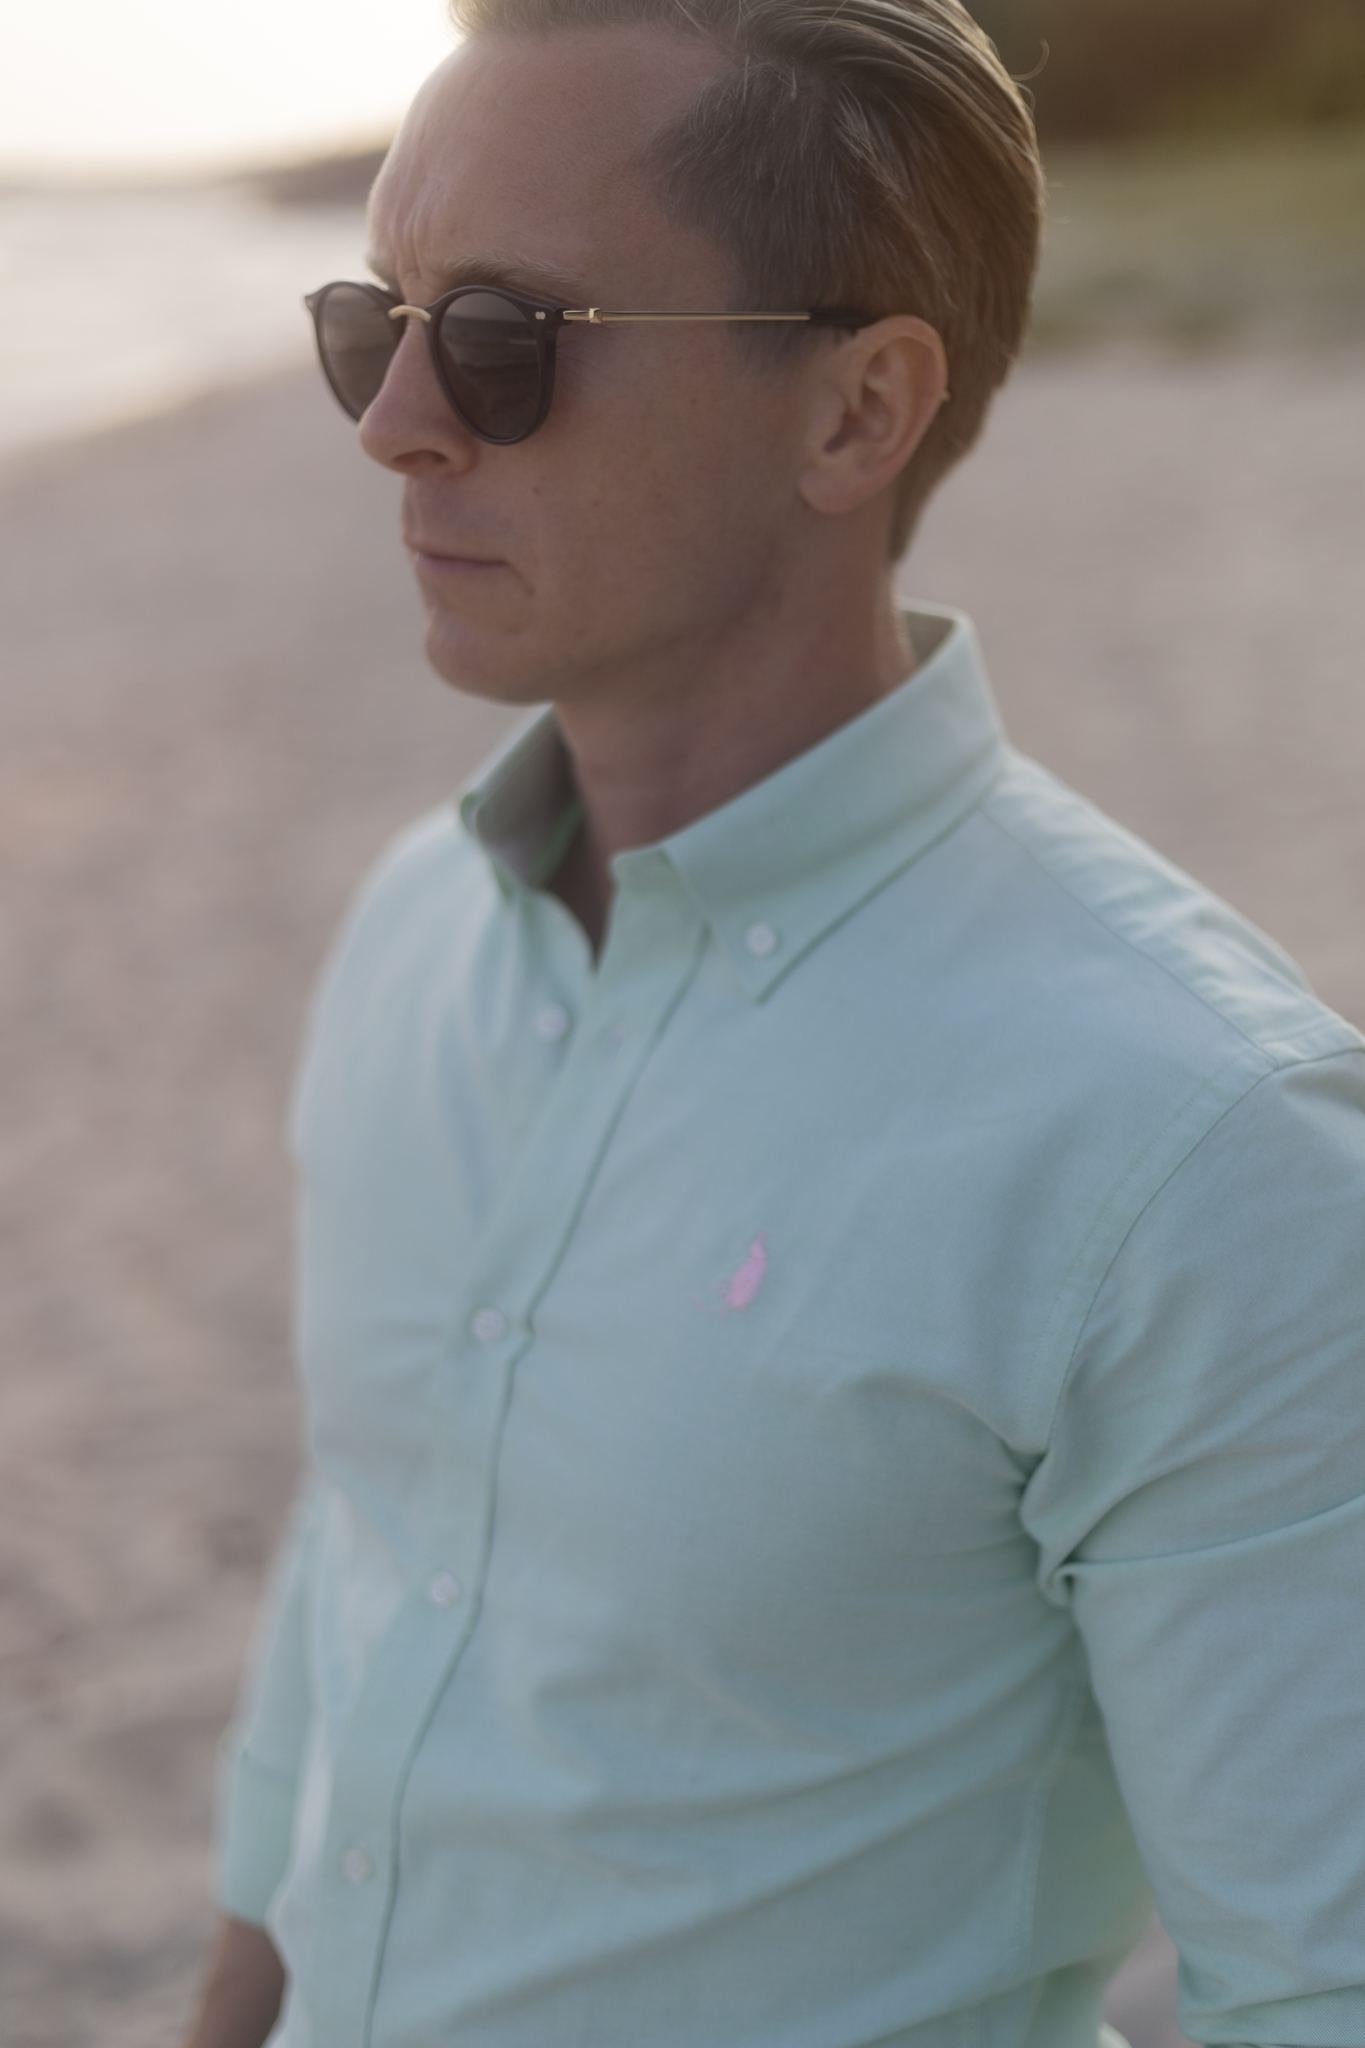 Oxford shirt  - Green Le Cannet